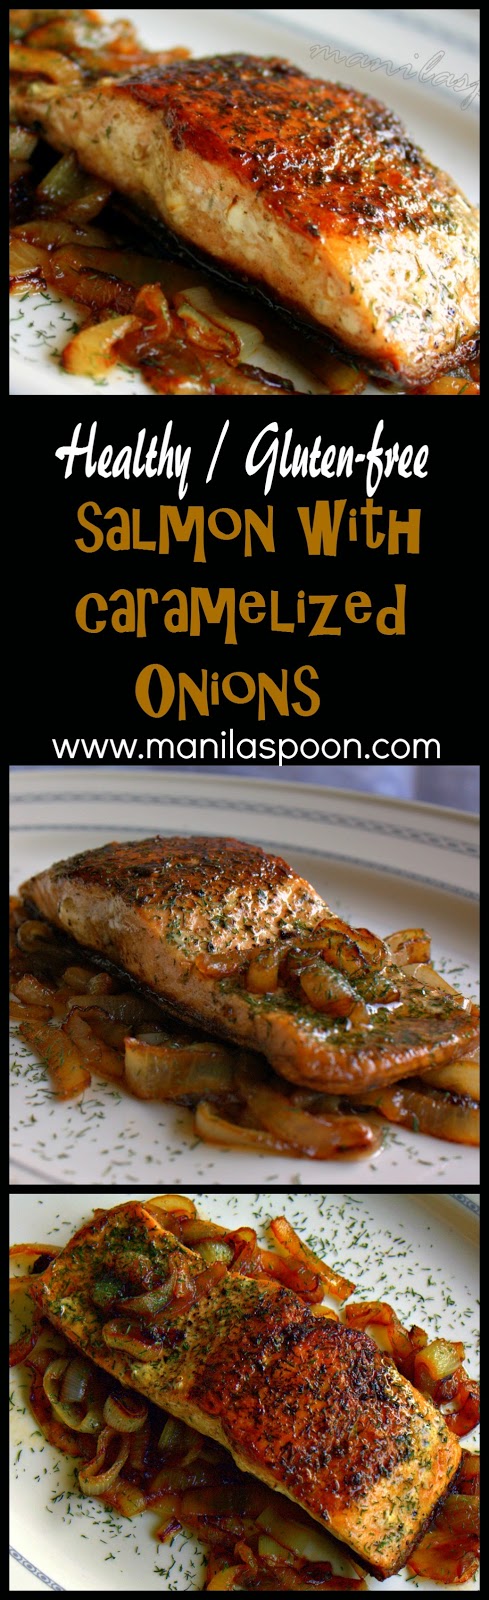 This super EASY SALMON RECIPE is so delicious that even kids love it! The caramelized onions are sweet and add so much flavor to the fish.